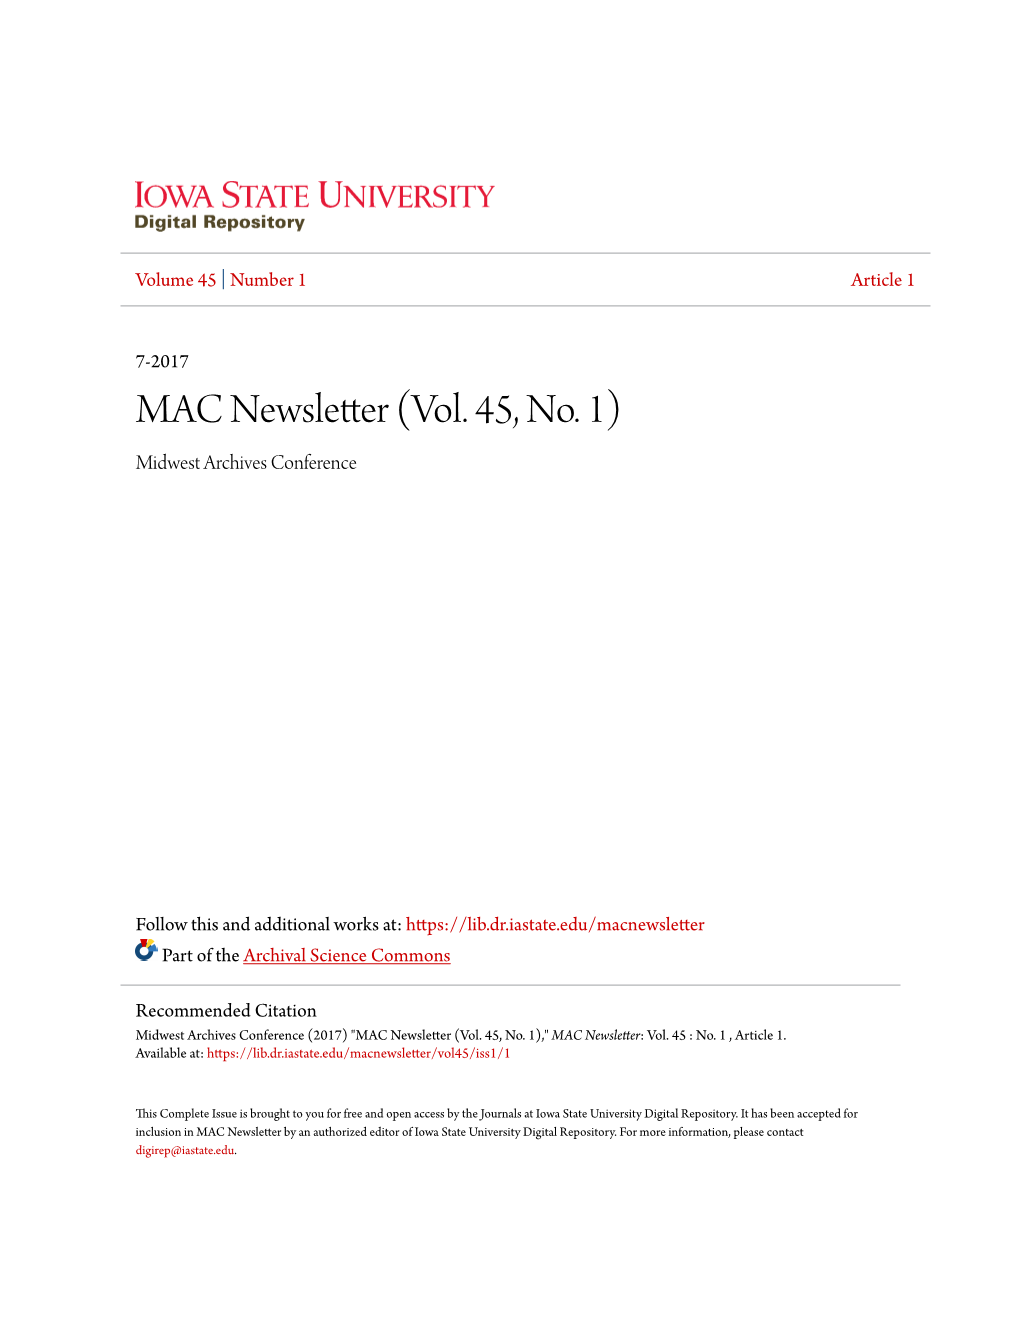 MAC Newsletter (Vol. 45, No. 1) Midwest Archives Conference